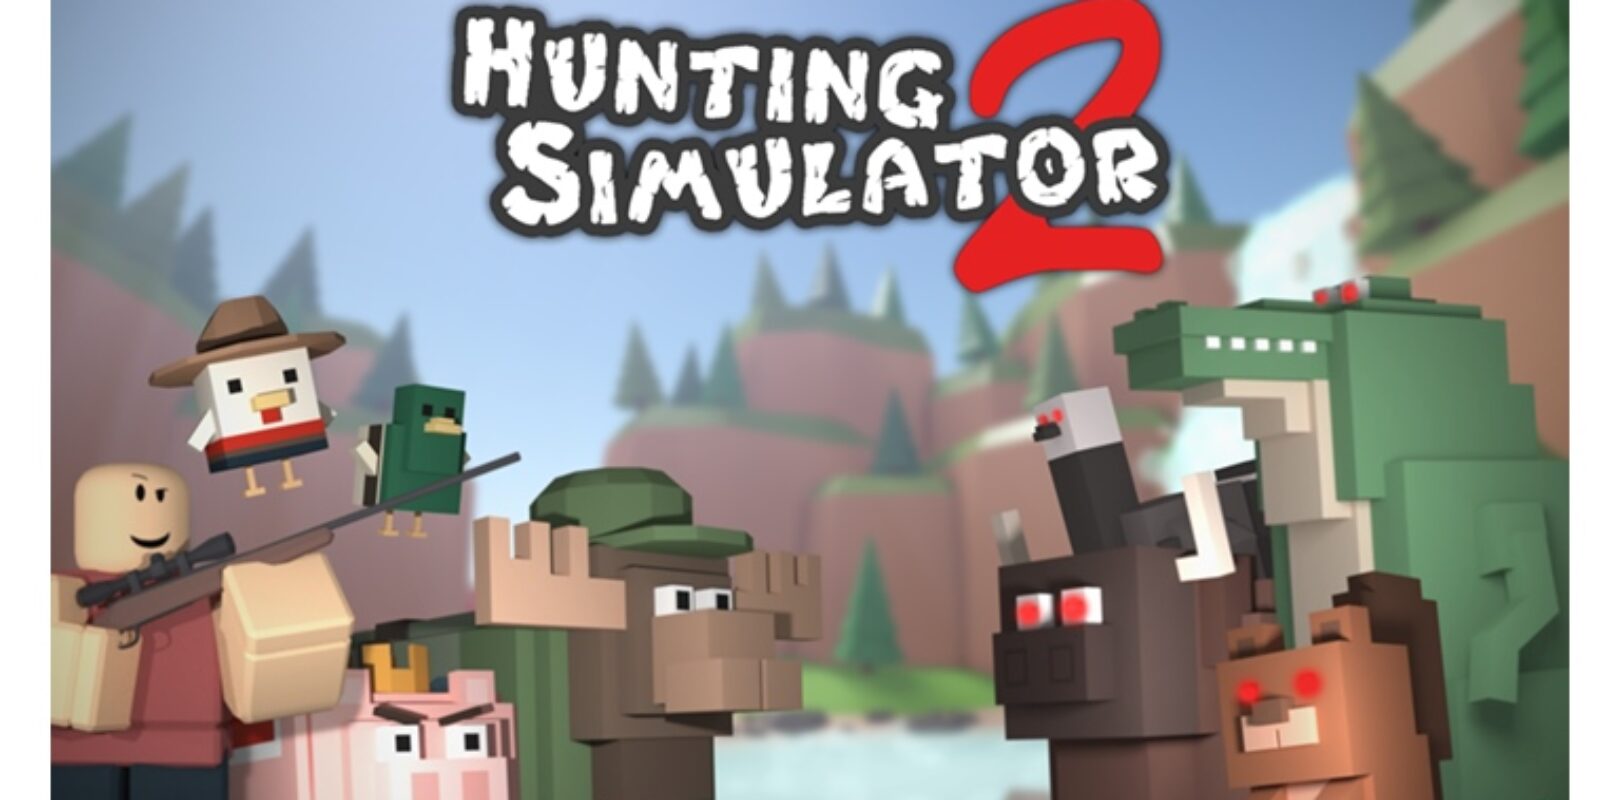 Hunting Simulator 2 Codes July 2021 Pivotal Gamers - all codes in lol wut roblox